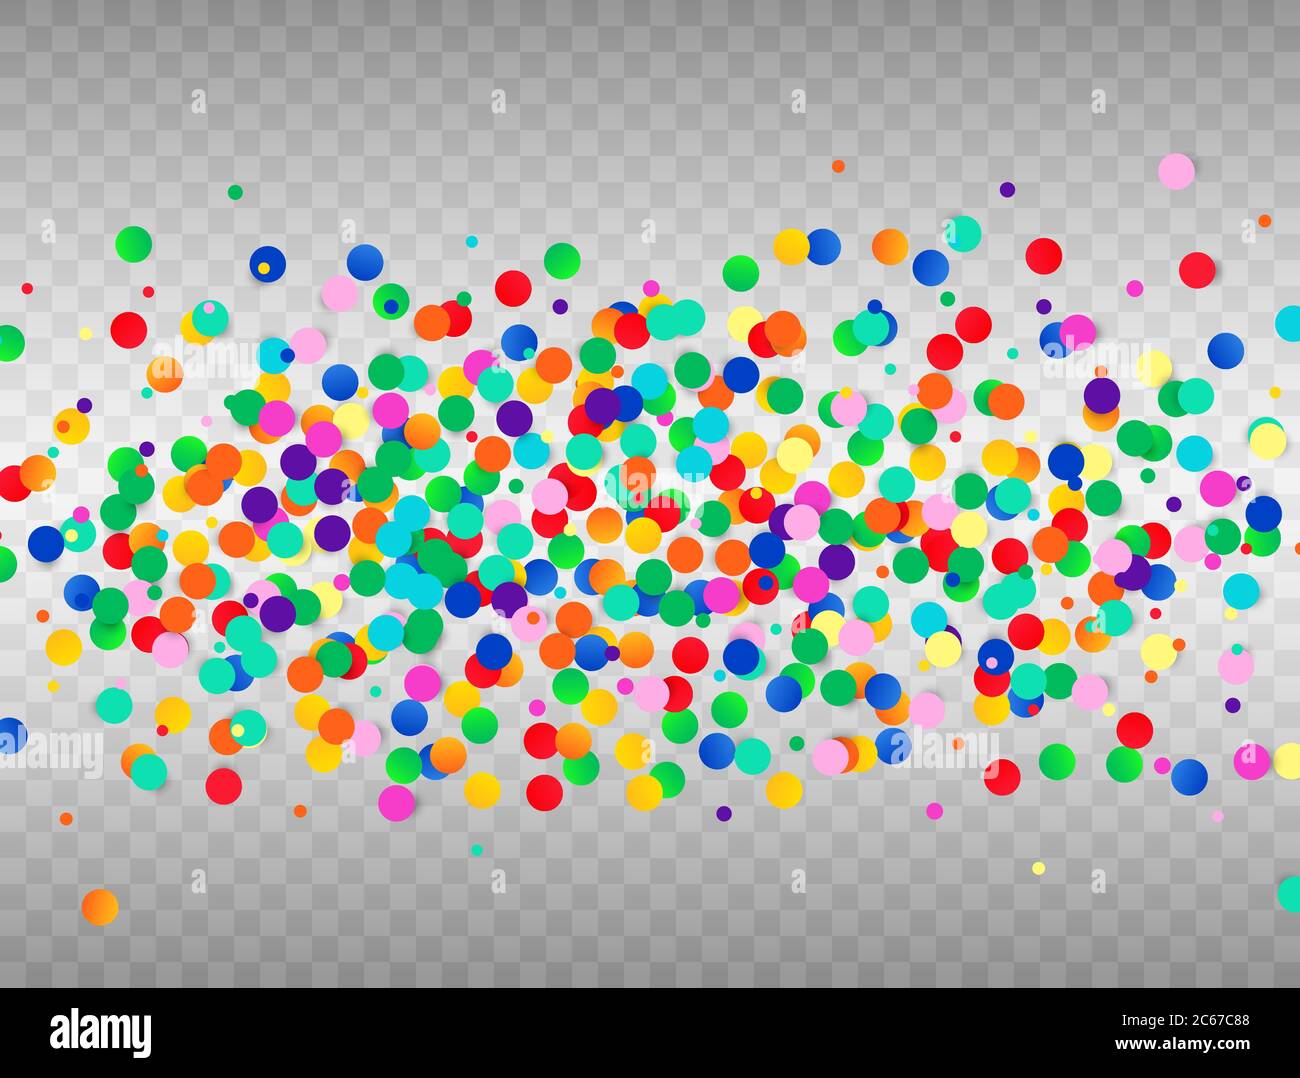 Colorful confetti on transparent background. Vector illustration. Stock Vector